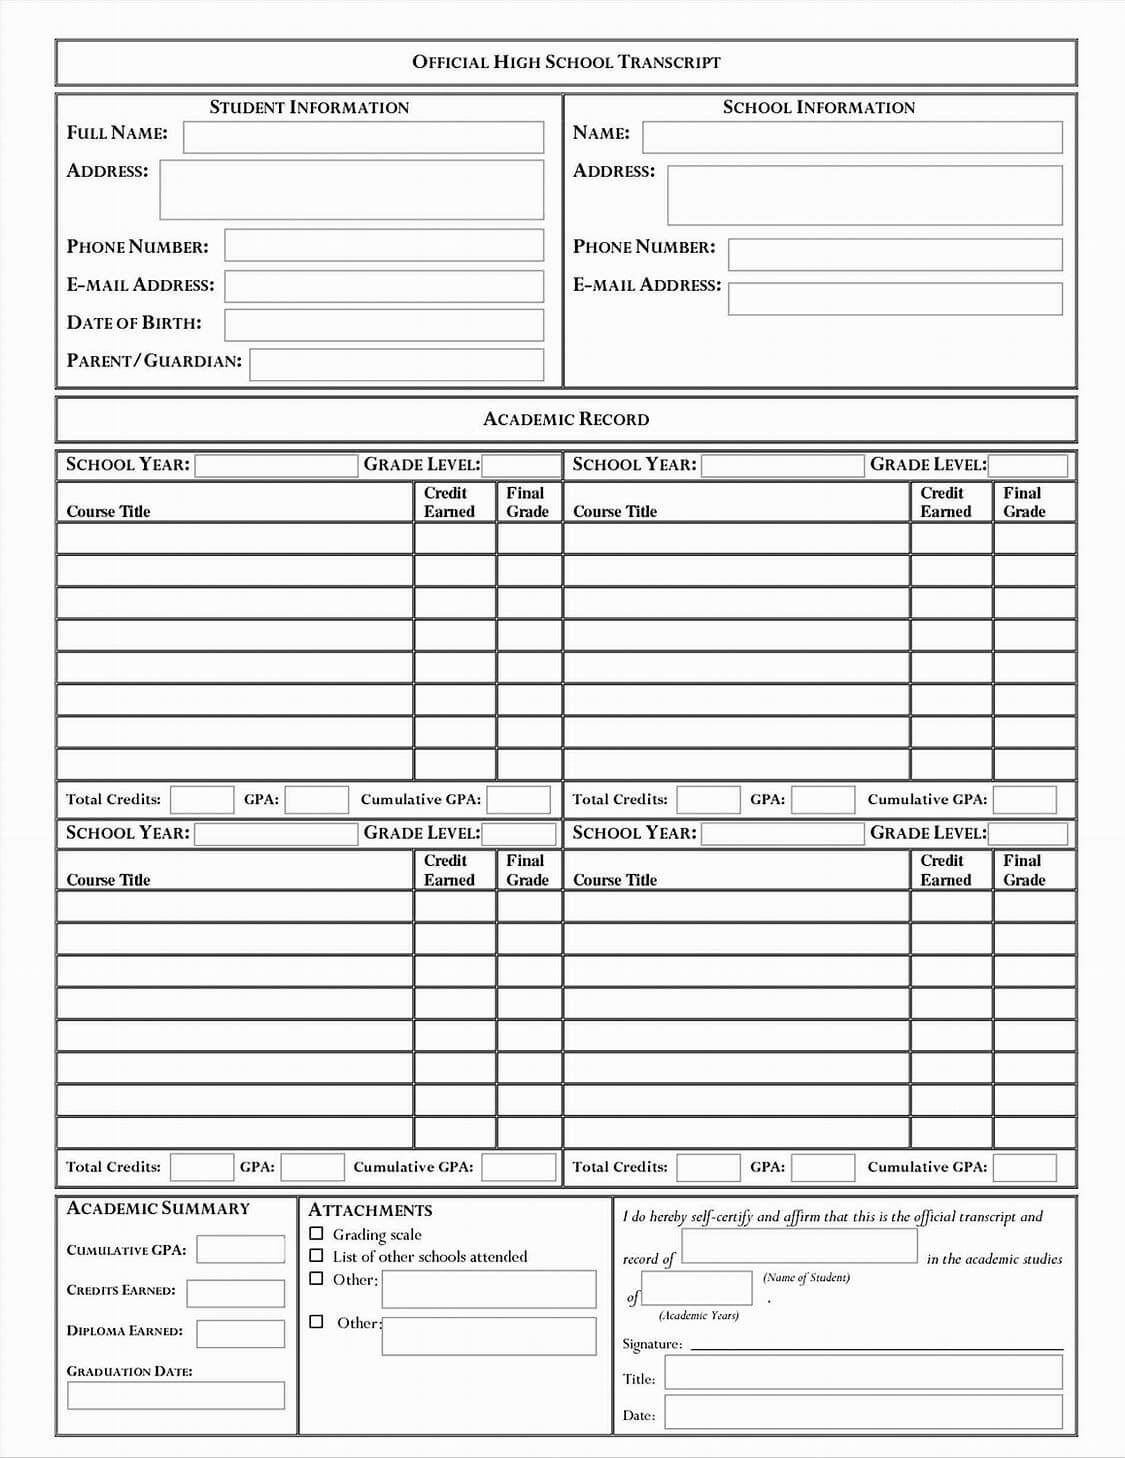 Image Result For Middle School Transcript Template | Free For Result Card Template